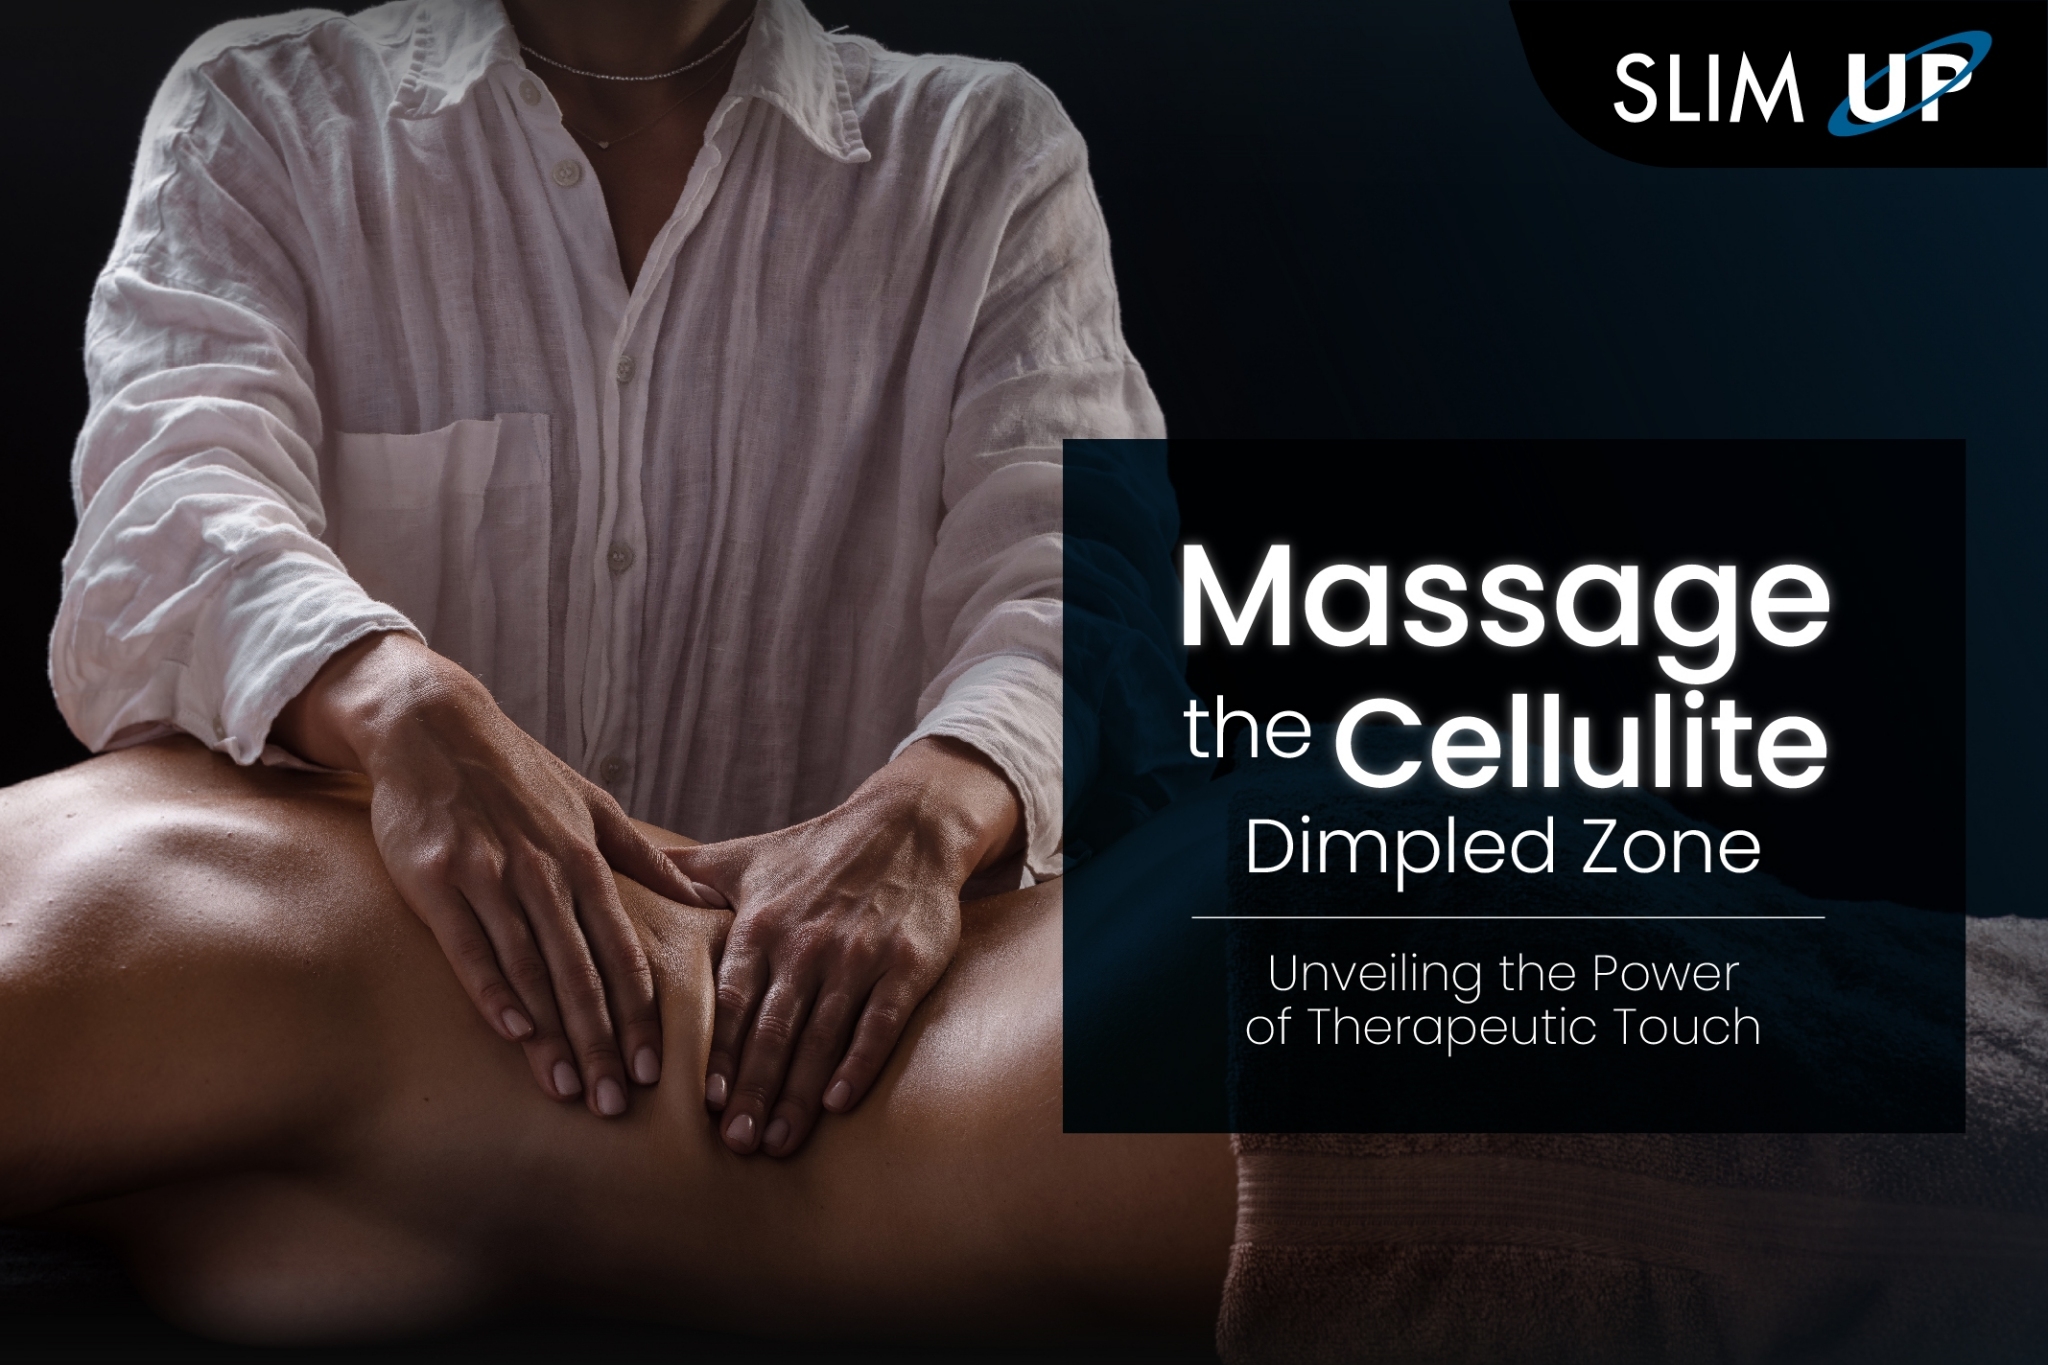 Unlocking the Potential of Therapeutic Touch: Exploring Massage for Cellulite-Prone Areas